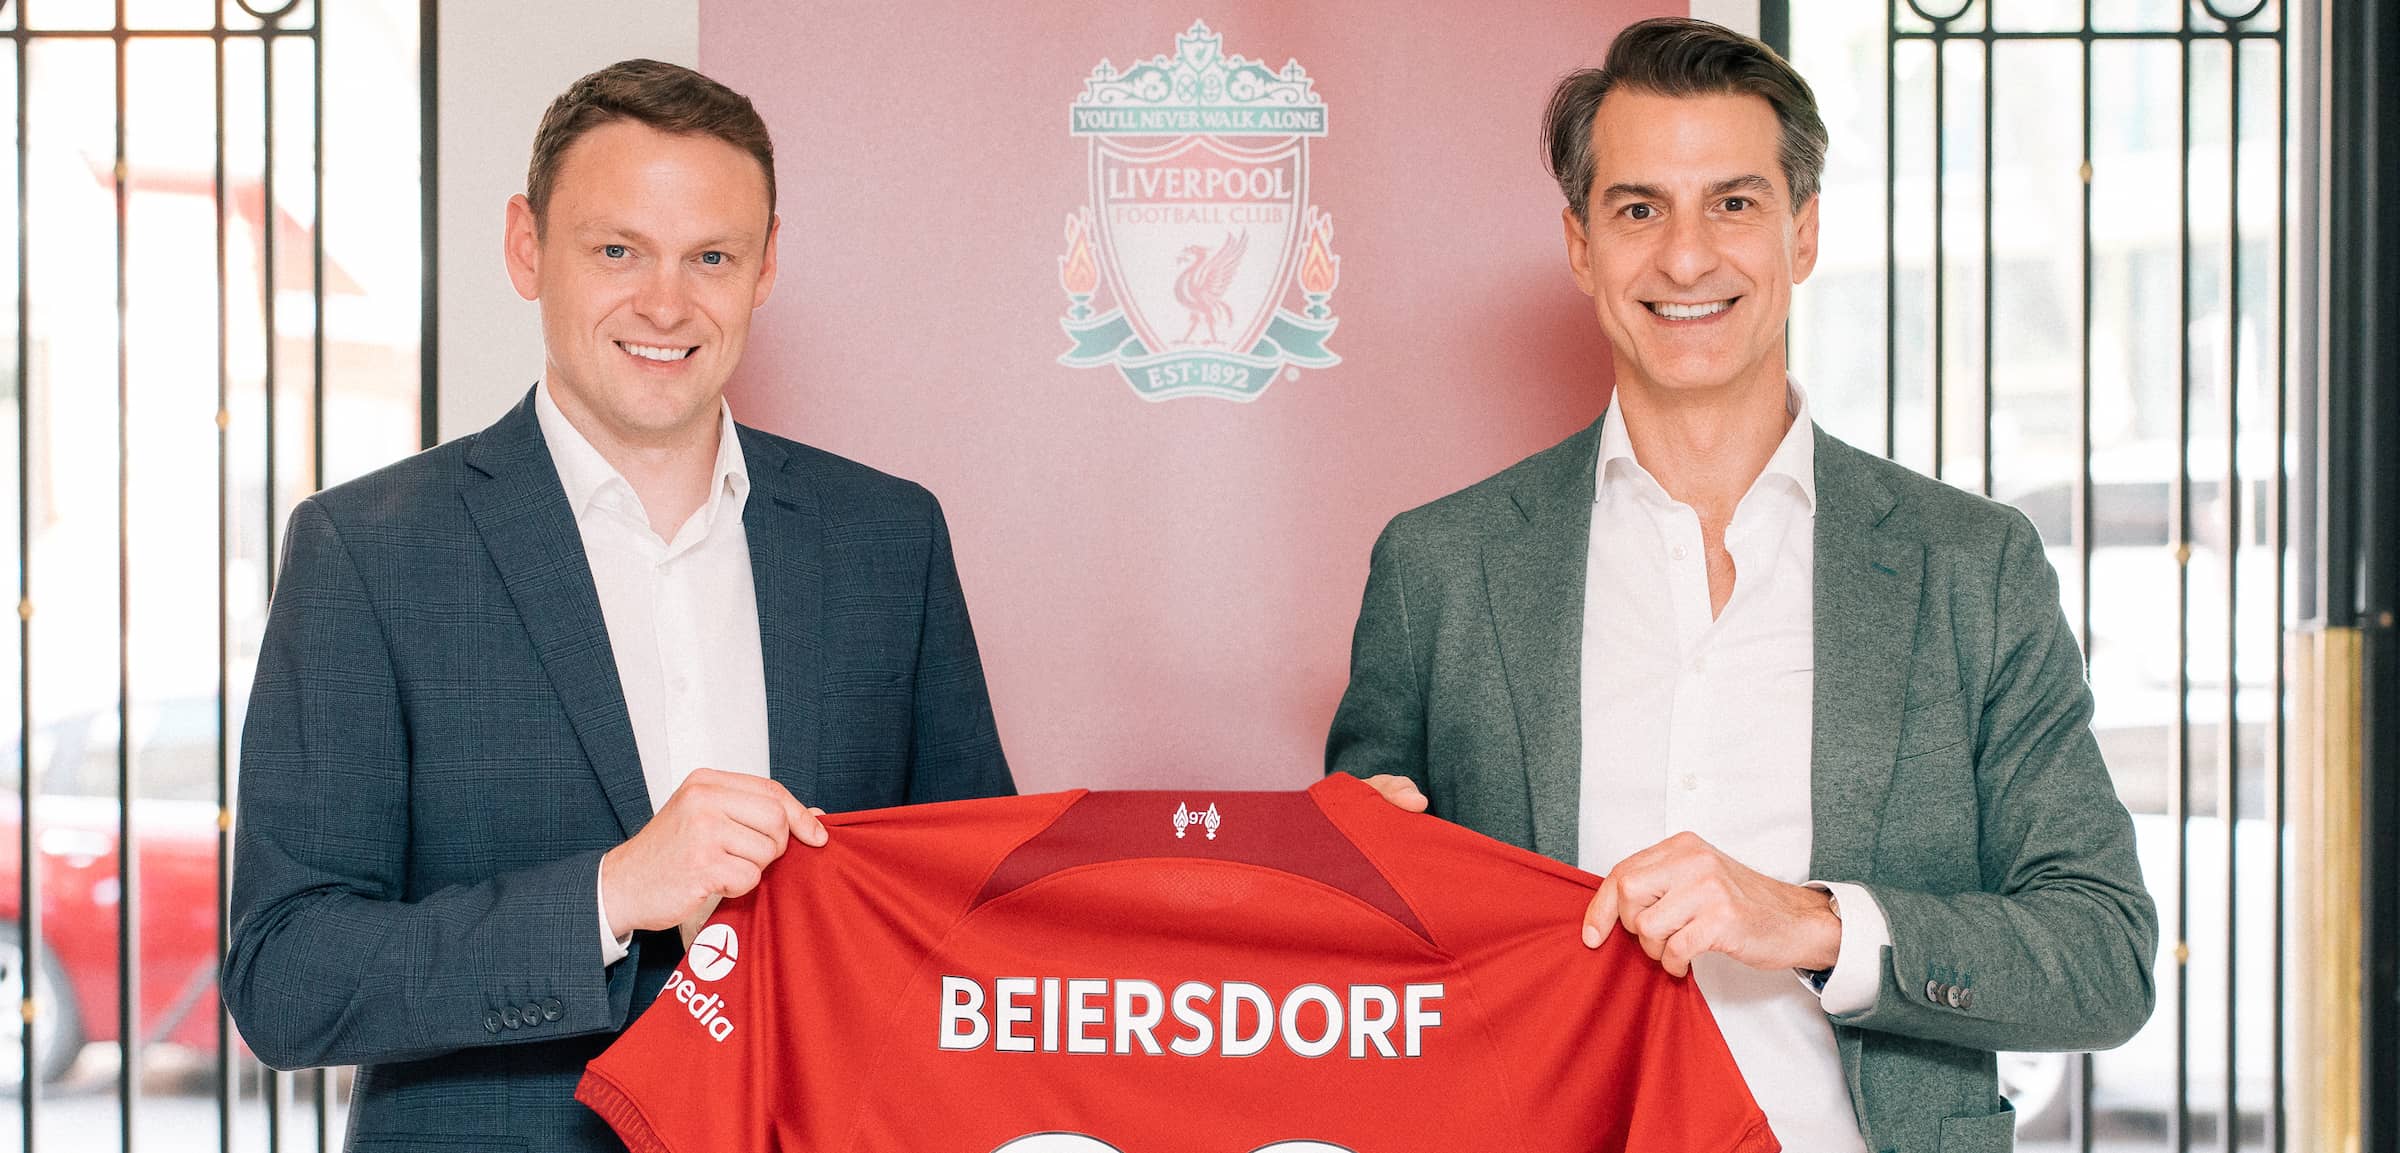 Ben latty liverpool fc commercial director and oswald barckhahn member of the executive board beiersdorf